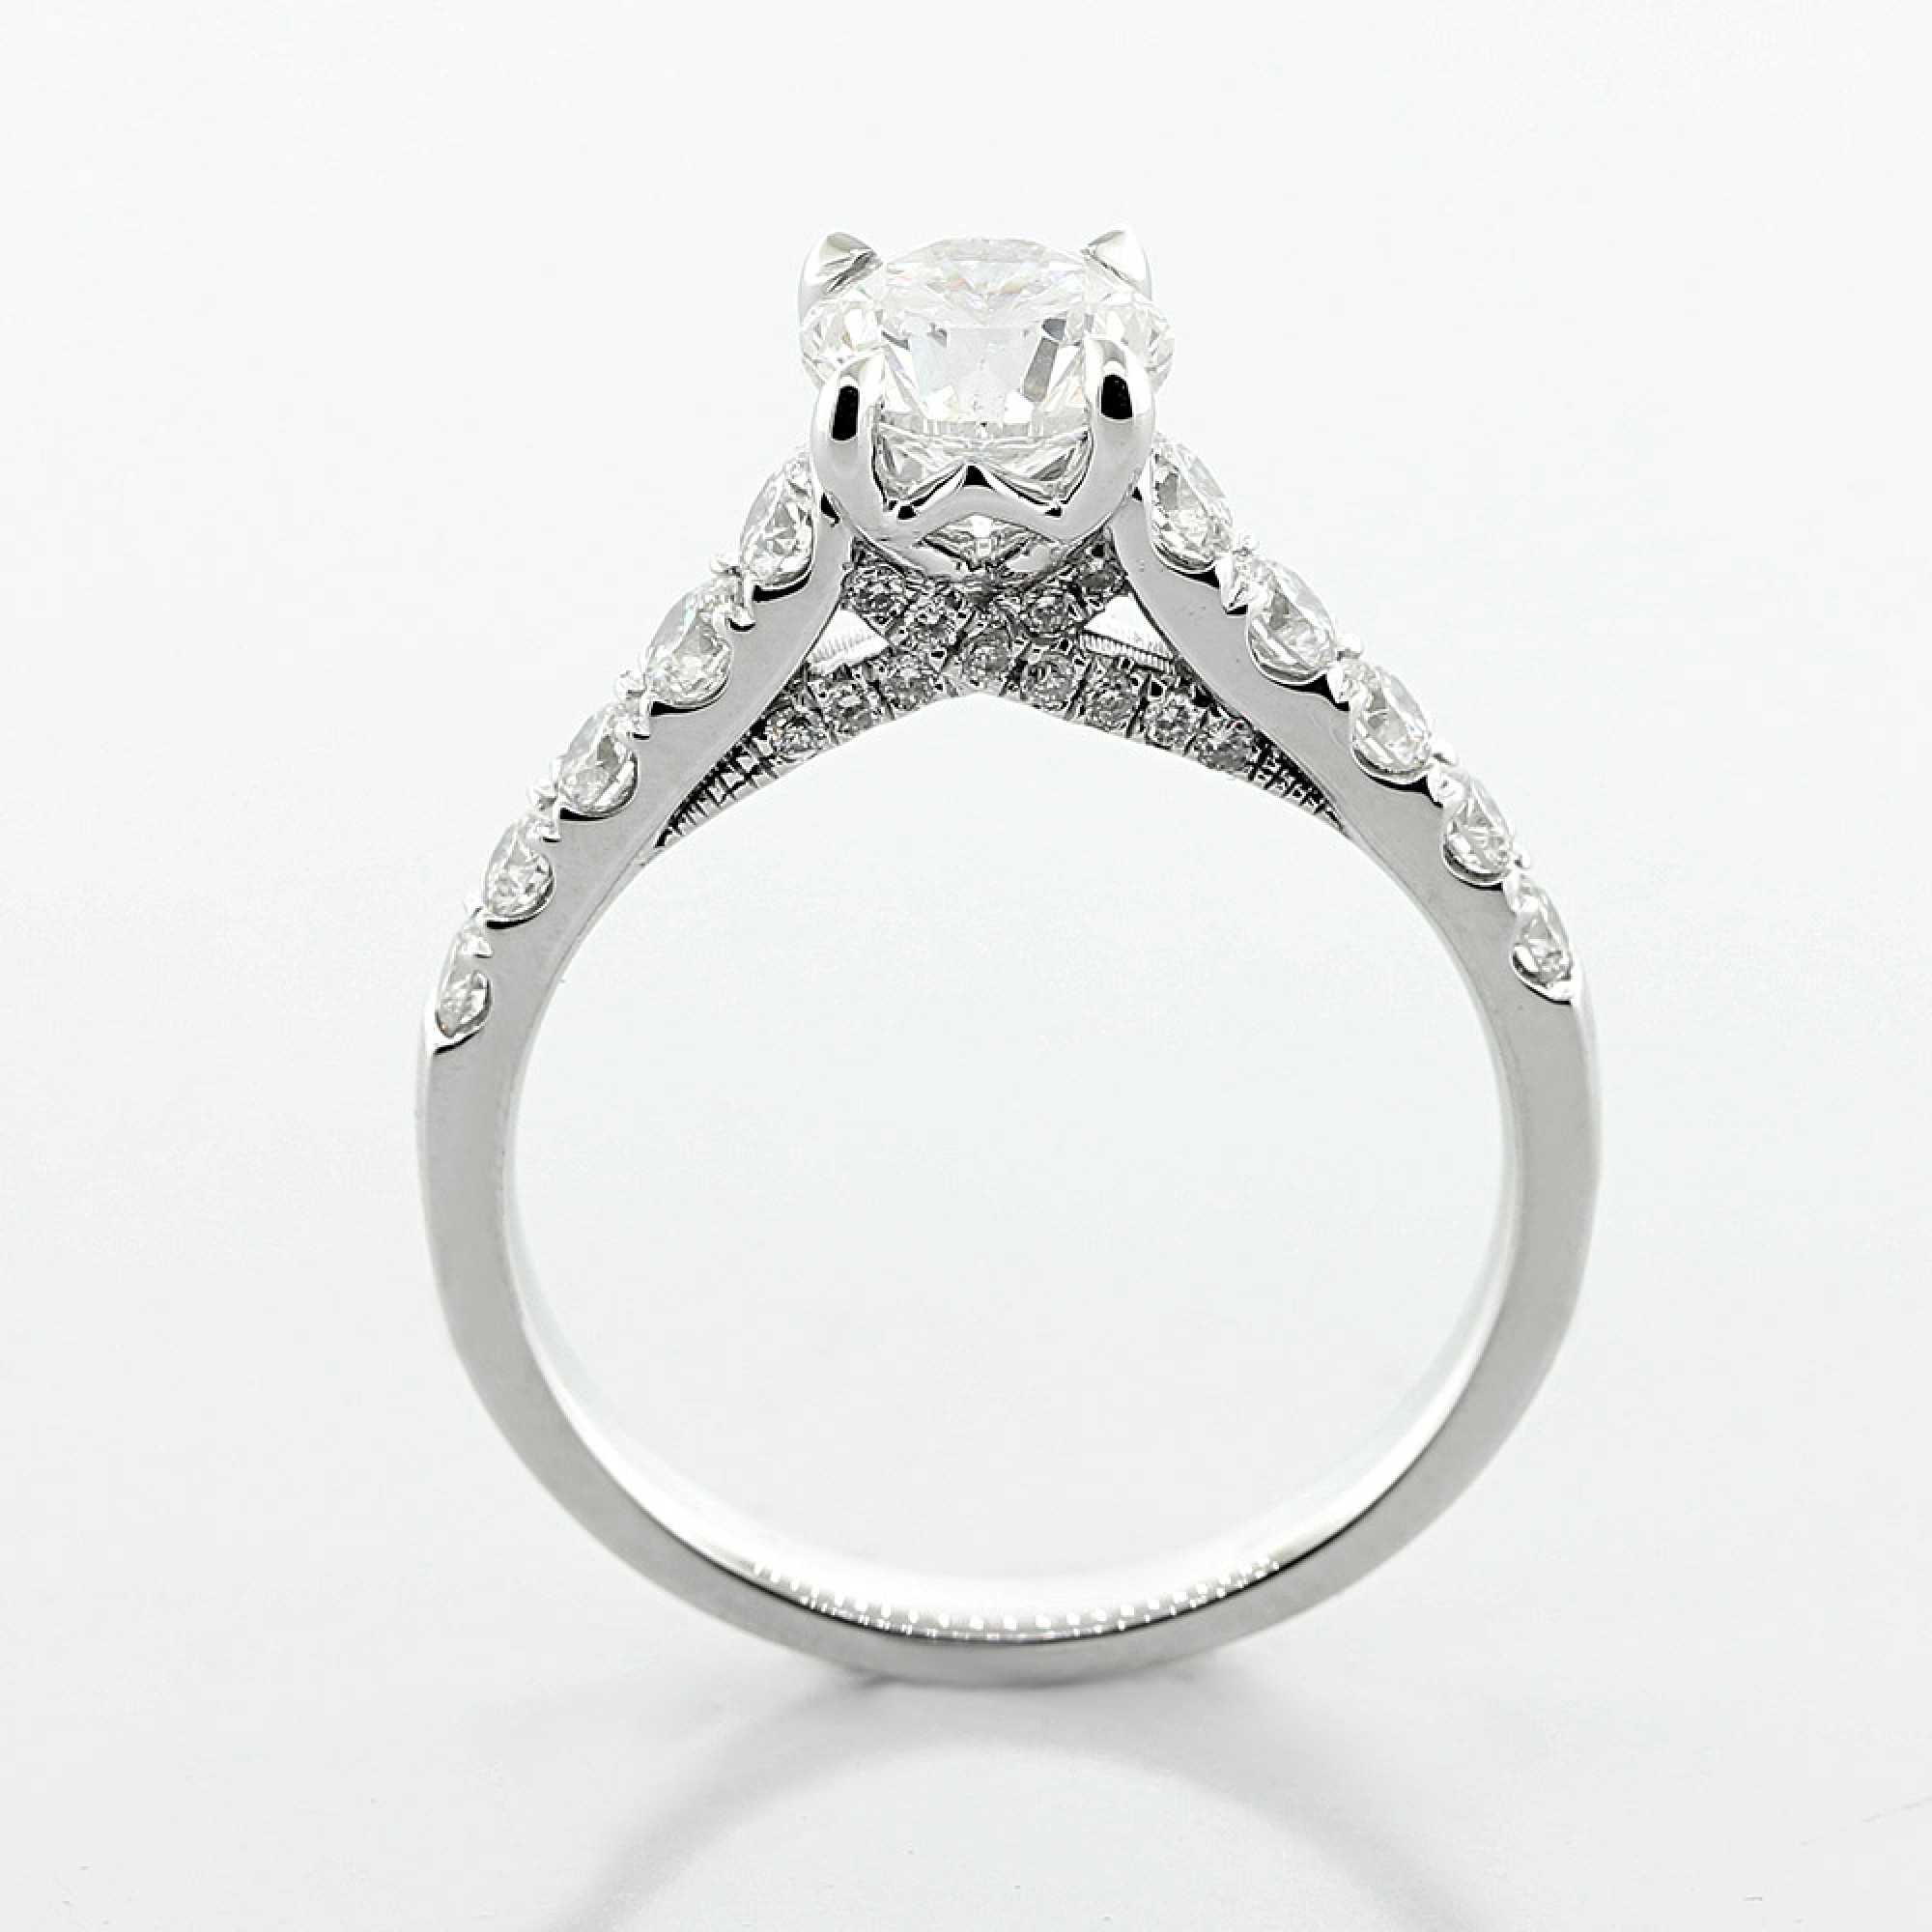 1.81 Cts Round Cut Diamond Engagement Ring set in 18K White Gold,Cheap ...